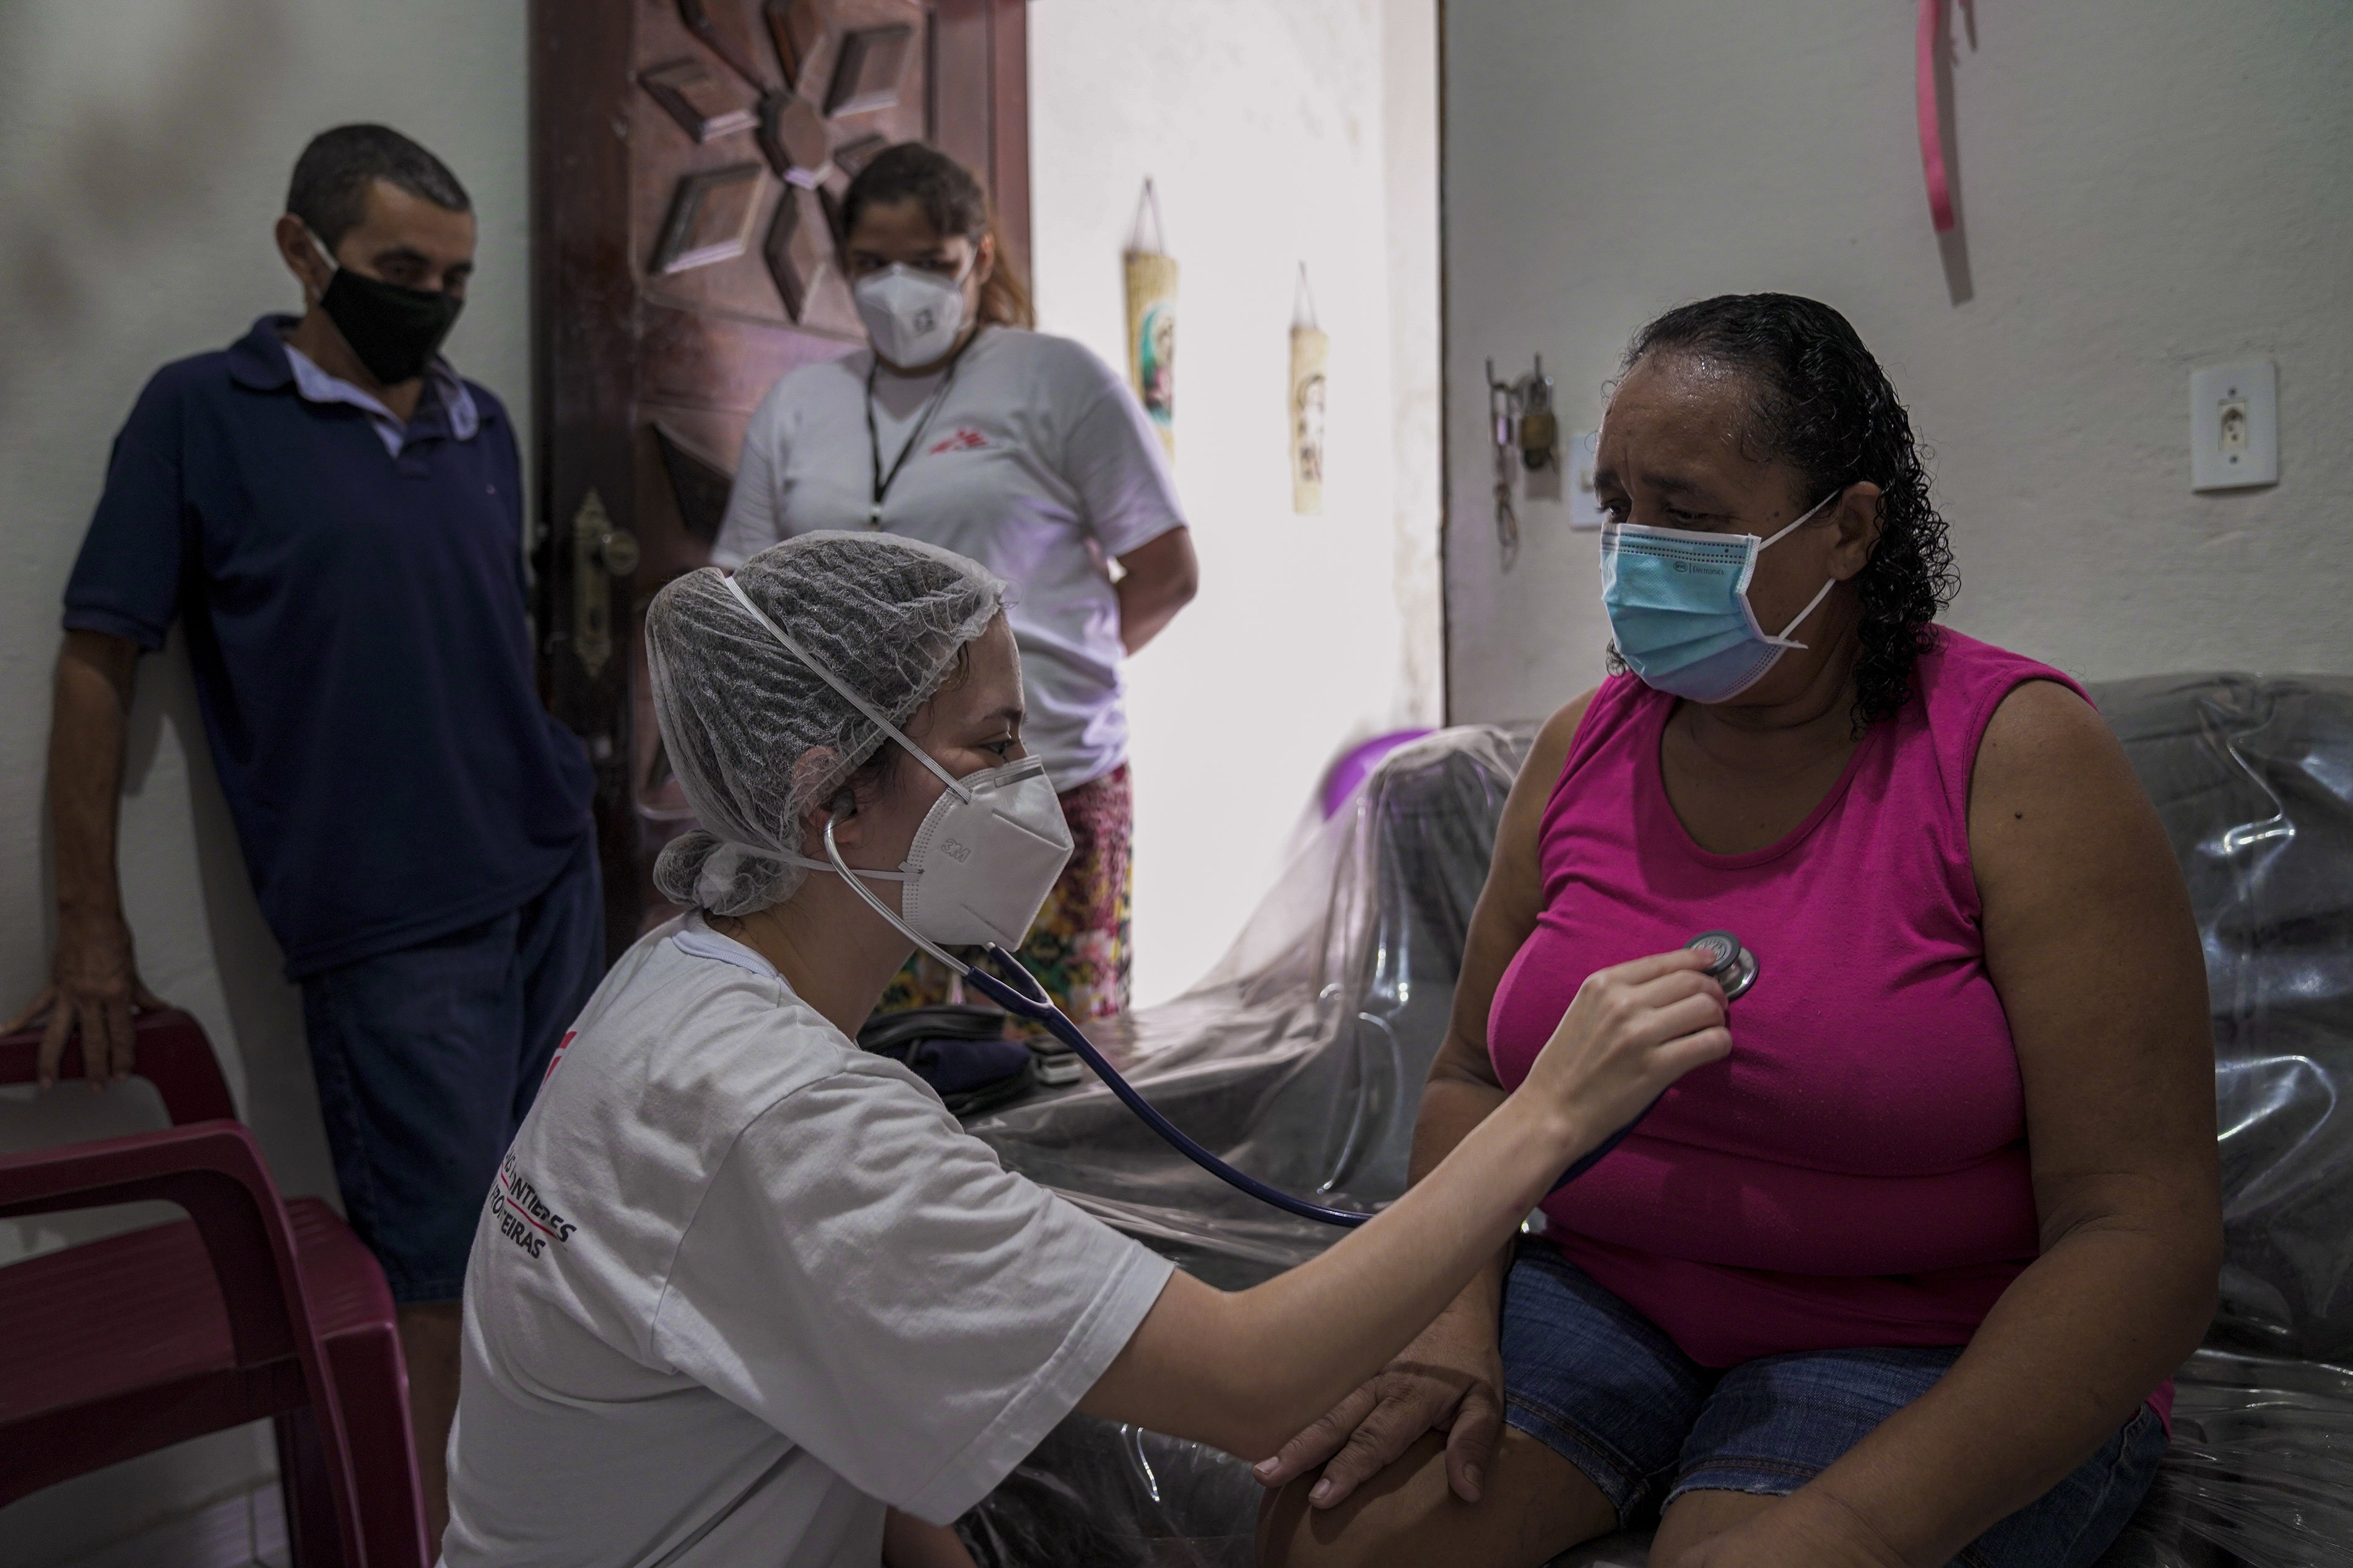 MSF's medical team visited Ana and Marcos de Oliveira at their home in the Grande Bom Jardim territory, Fortaleza, a few days after they tested positive for COVID-19 in one of our mobile clinics. 